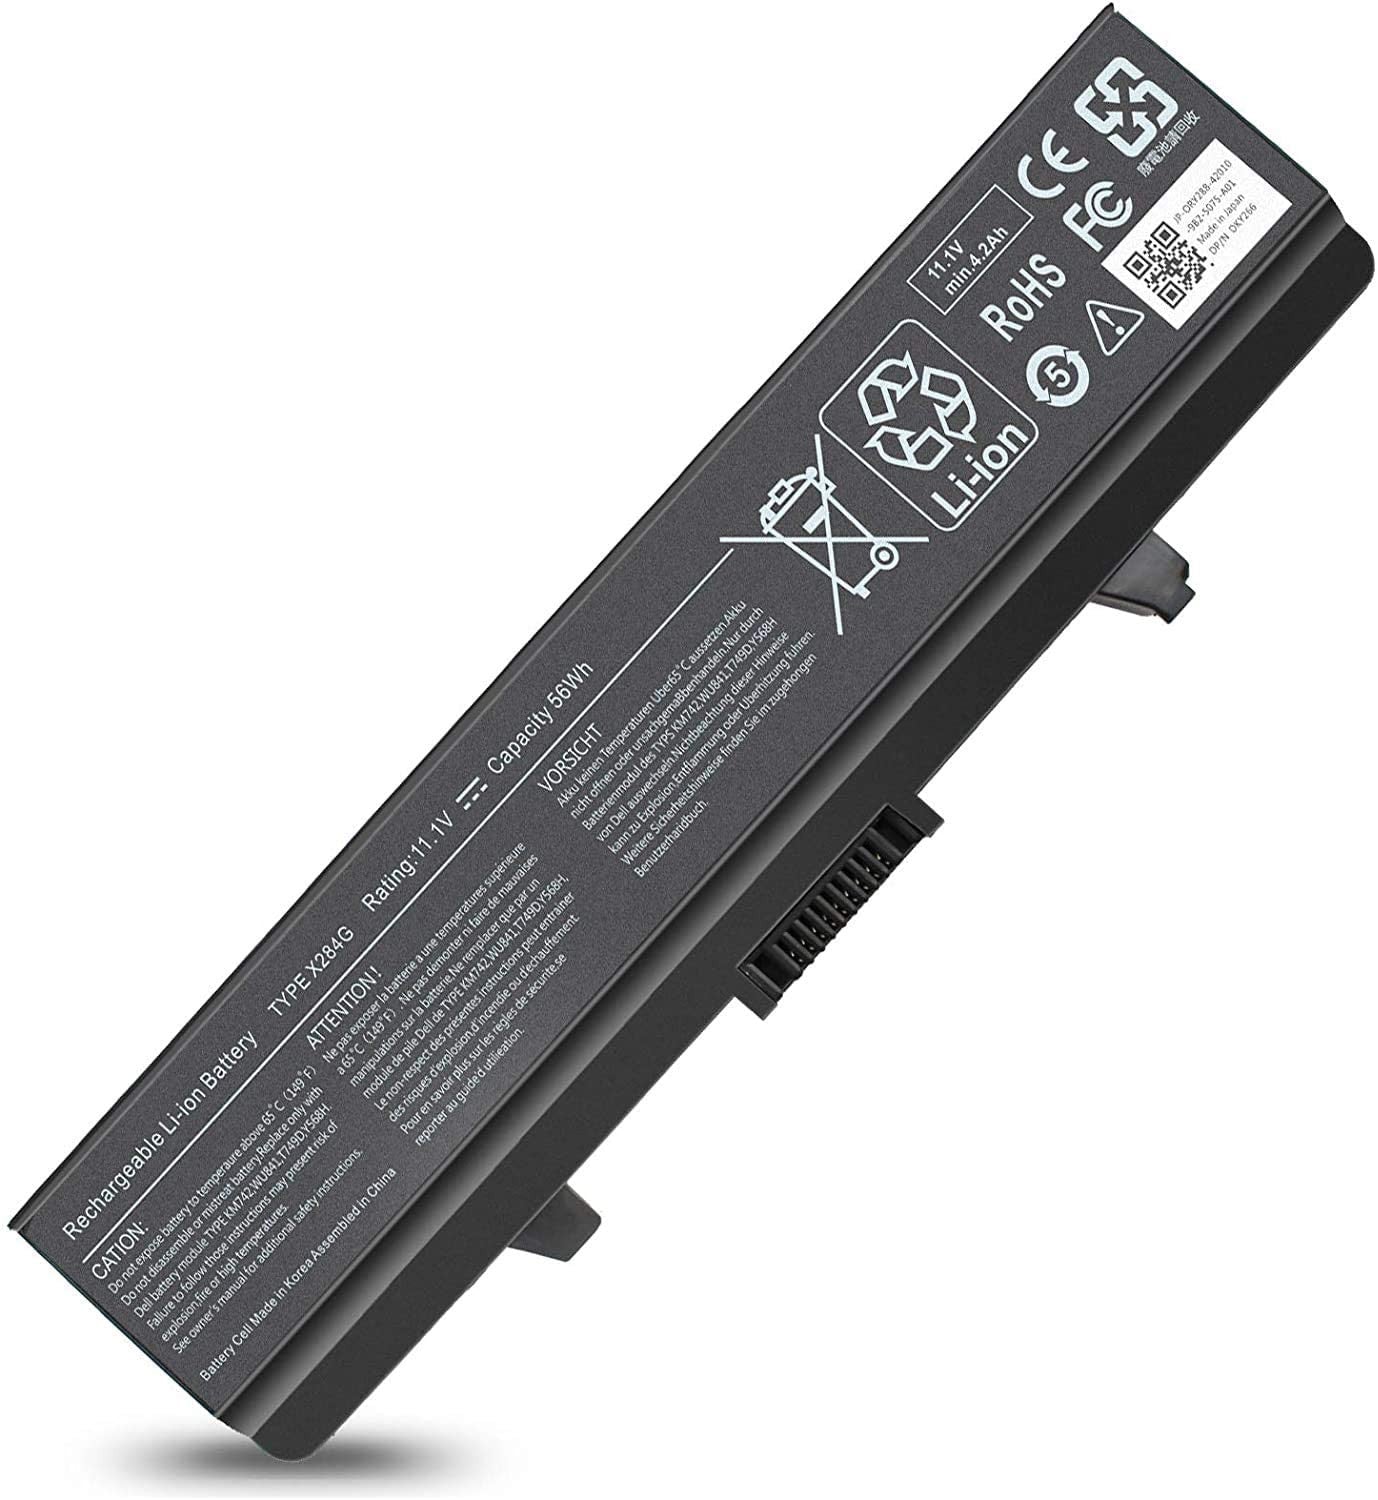 Dell Inspiron 1545 / 1525 Laptop Battery